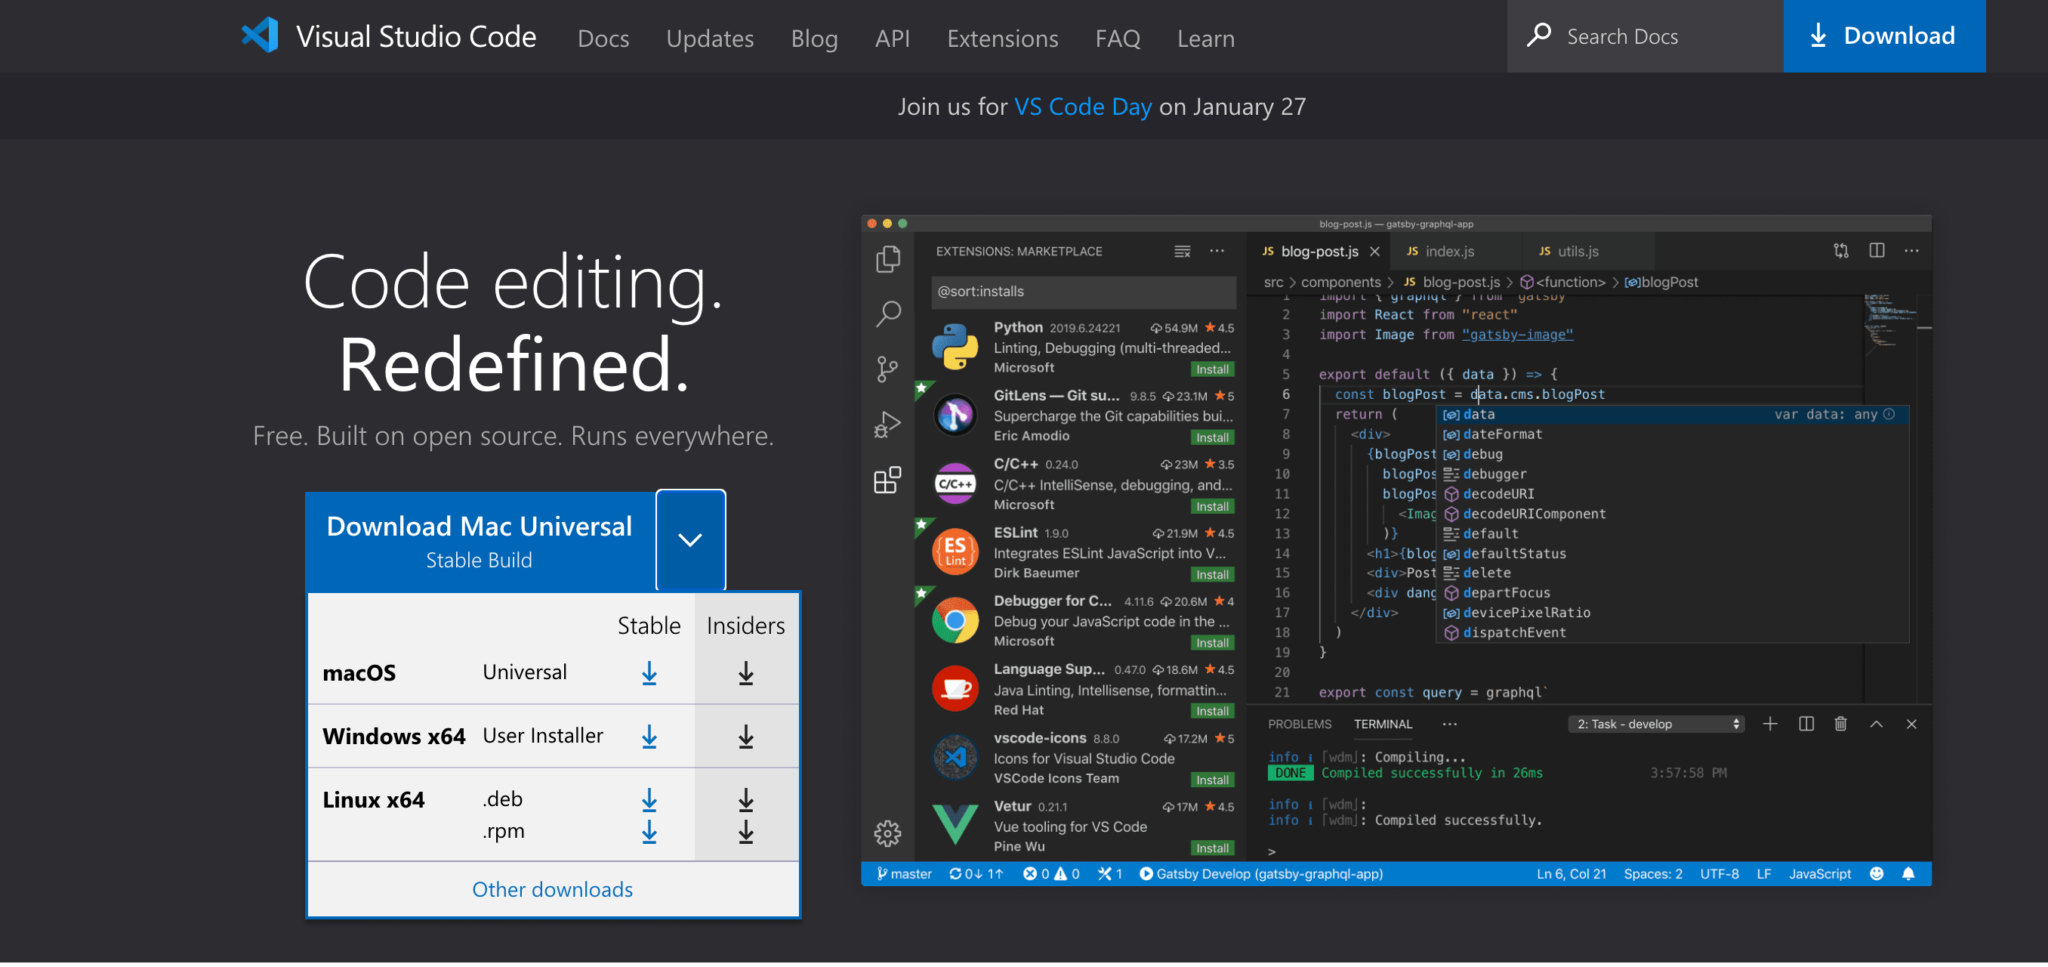 download the new for apple Visual Studio Code 1.82.3